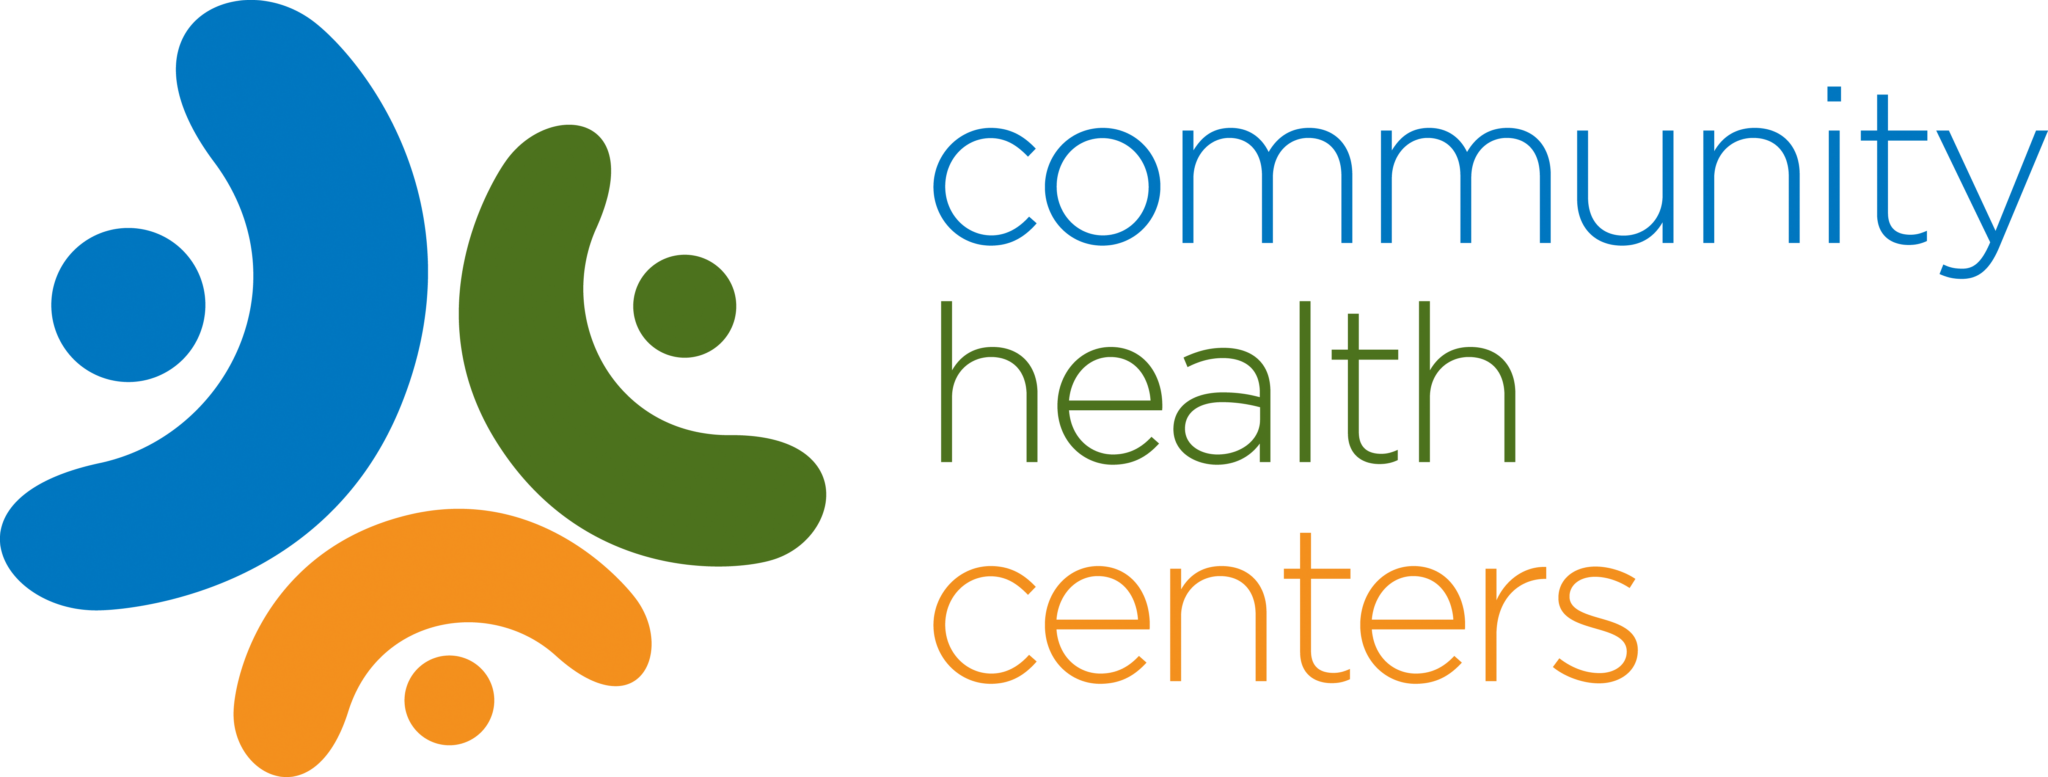 Community Health Centers, Inc. â€“ The Best and Brightest